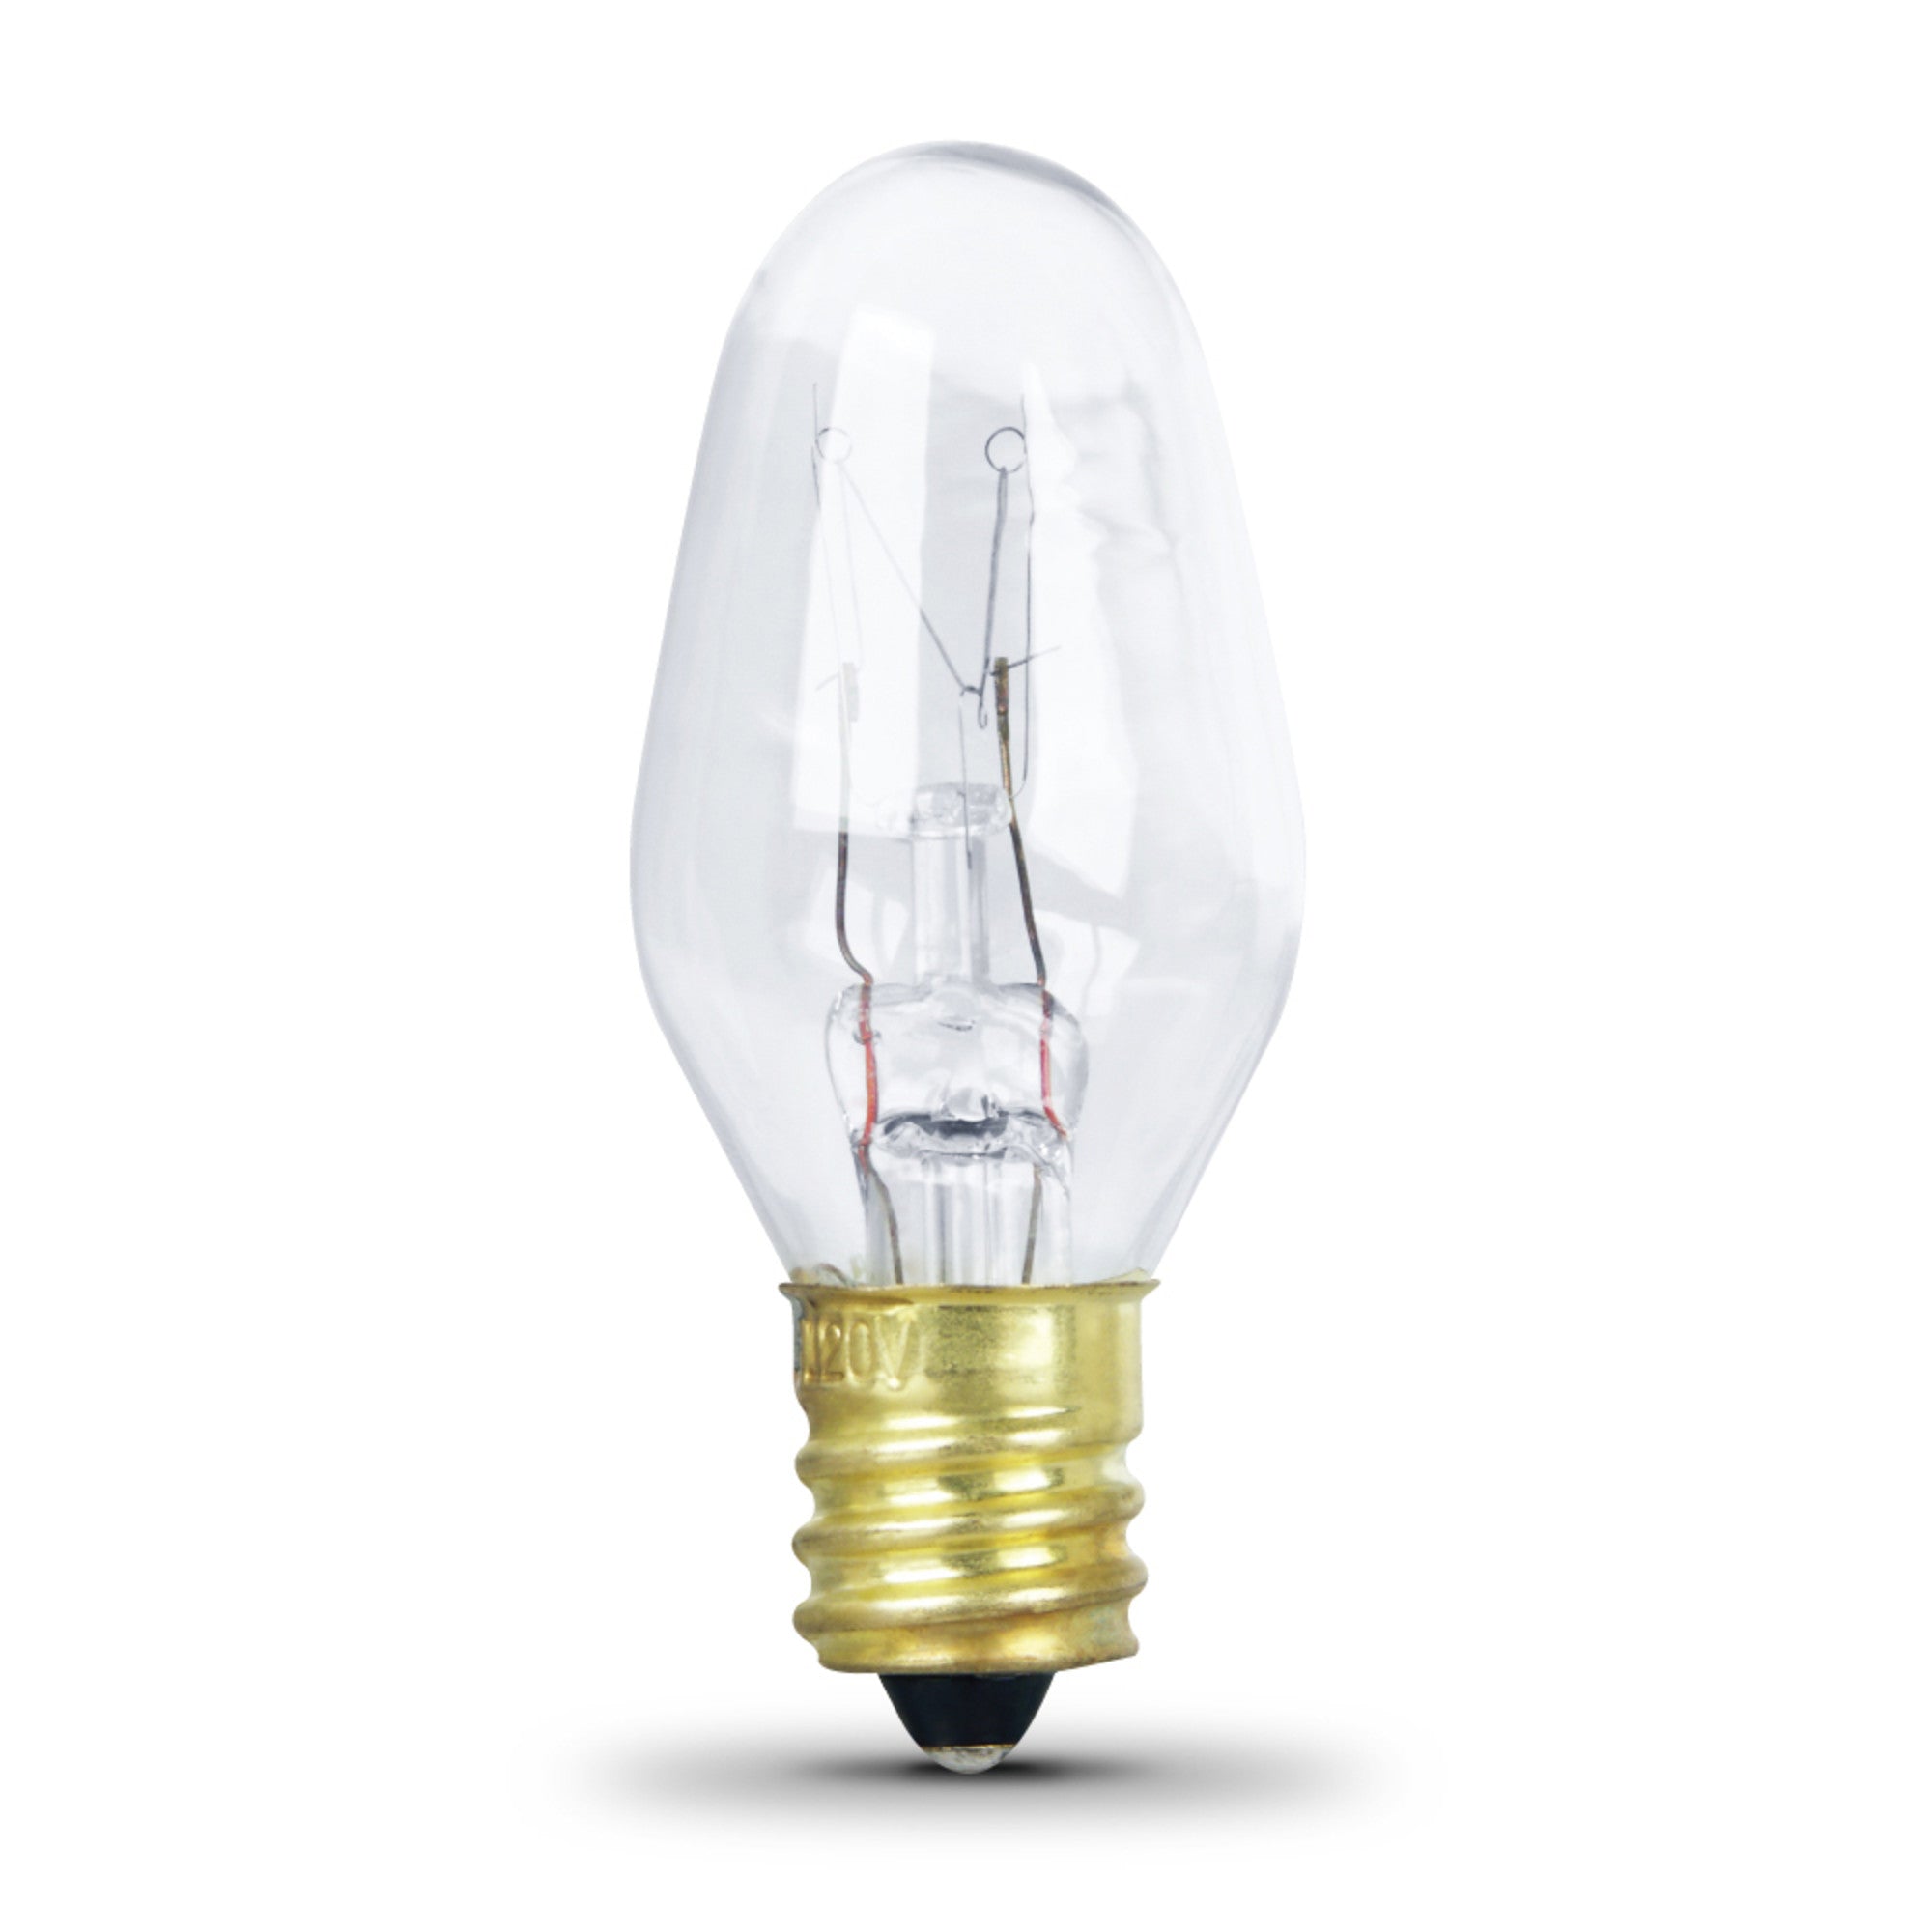 7W 130-Volt Soft White (2700K) E12 Base C7 Dimmable Clear Incandescent